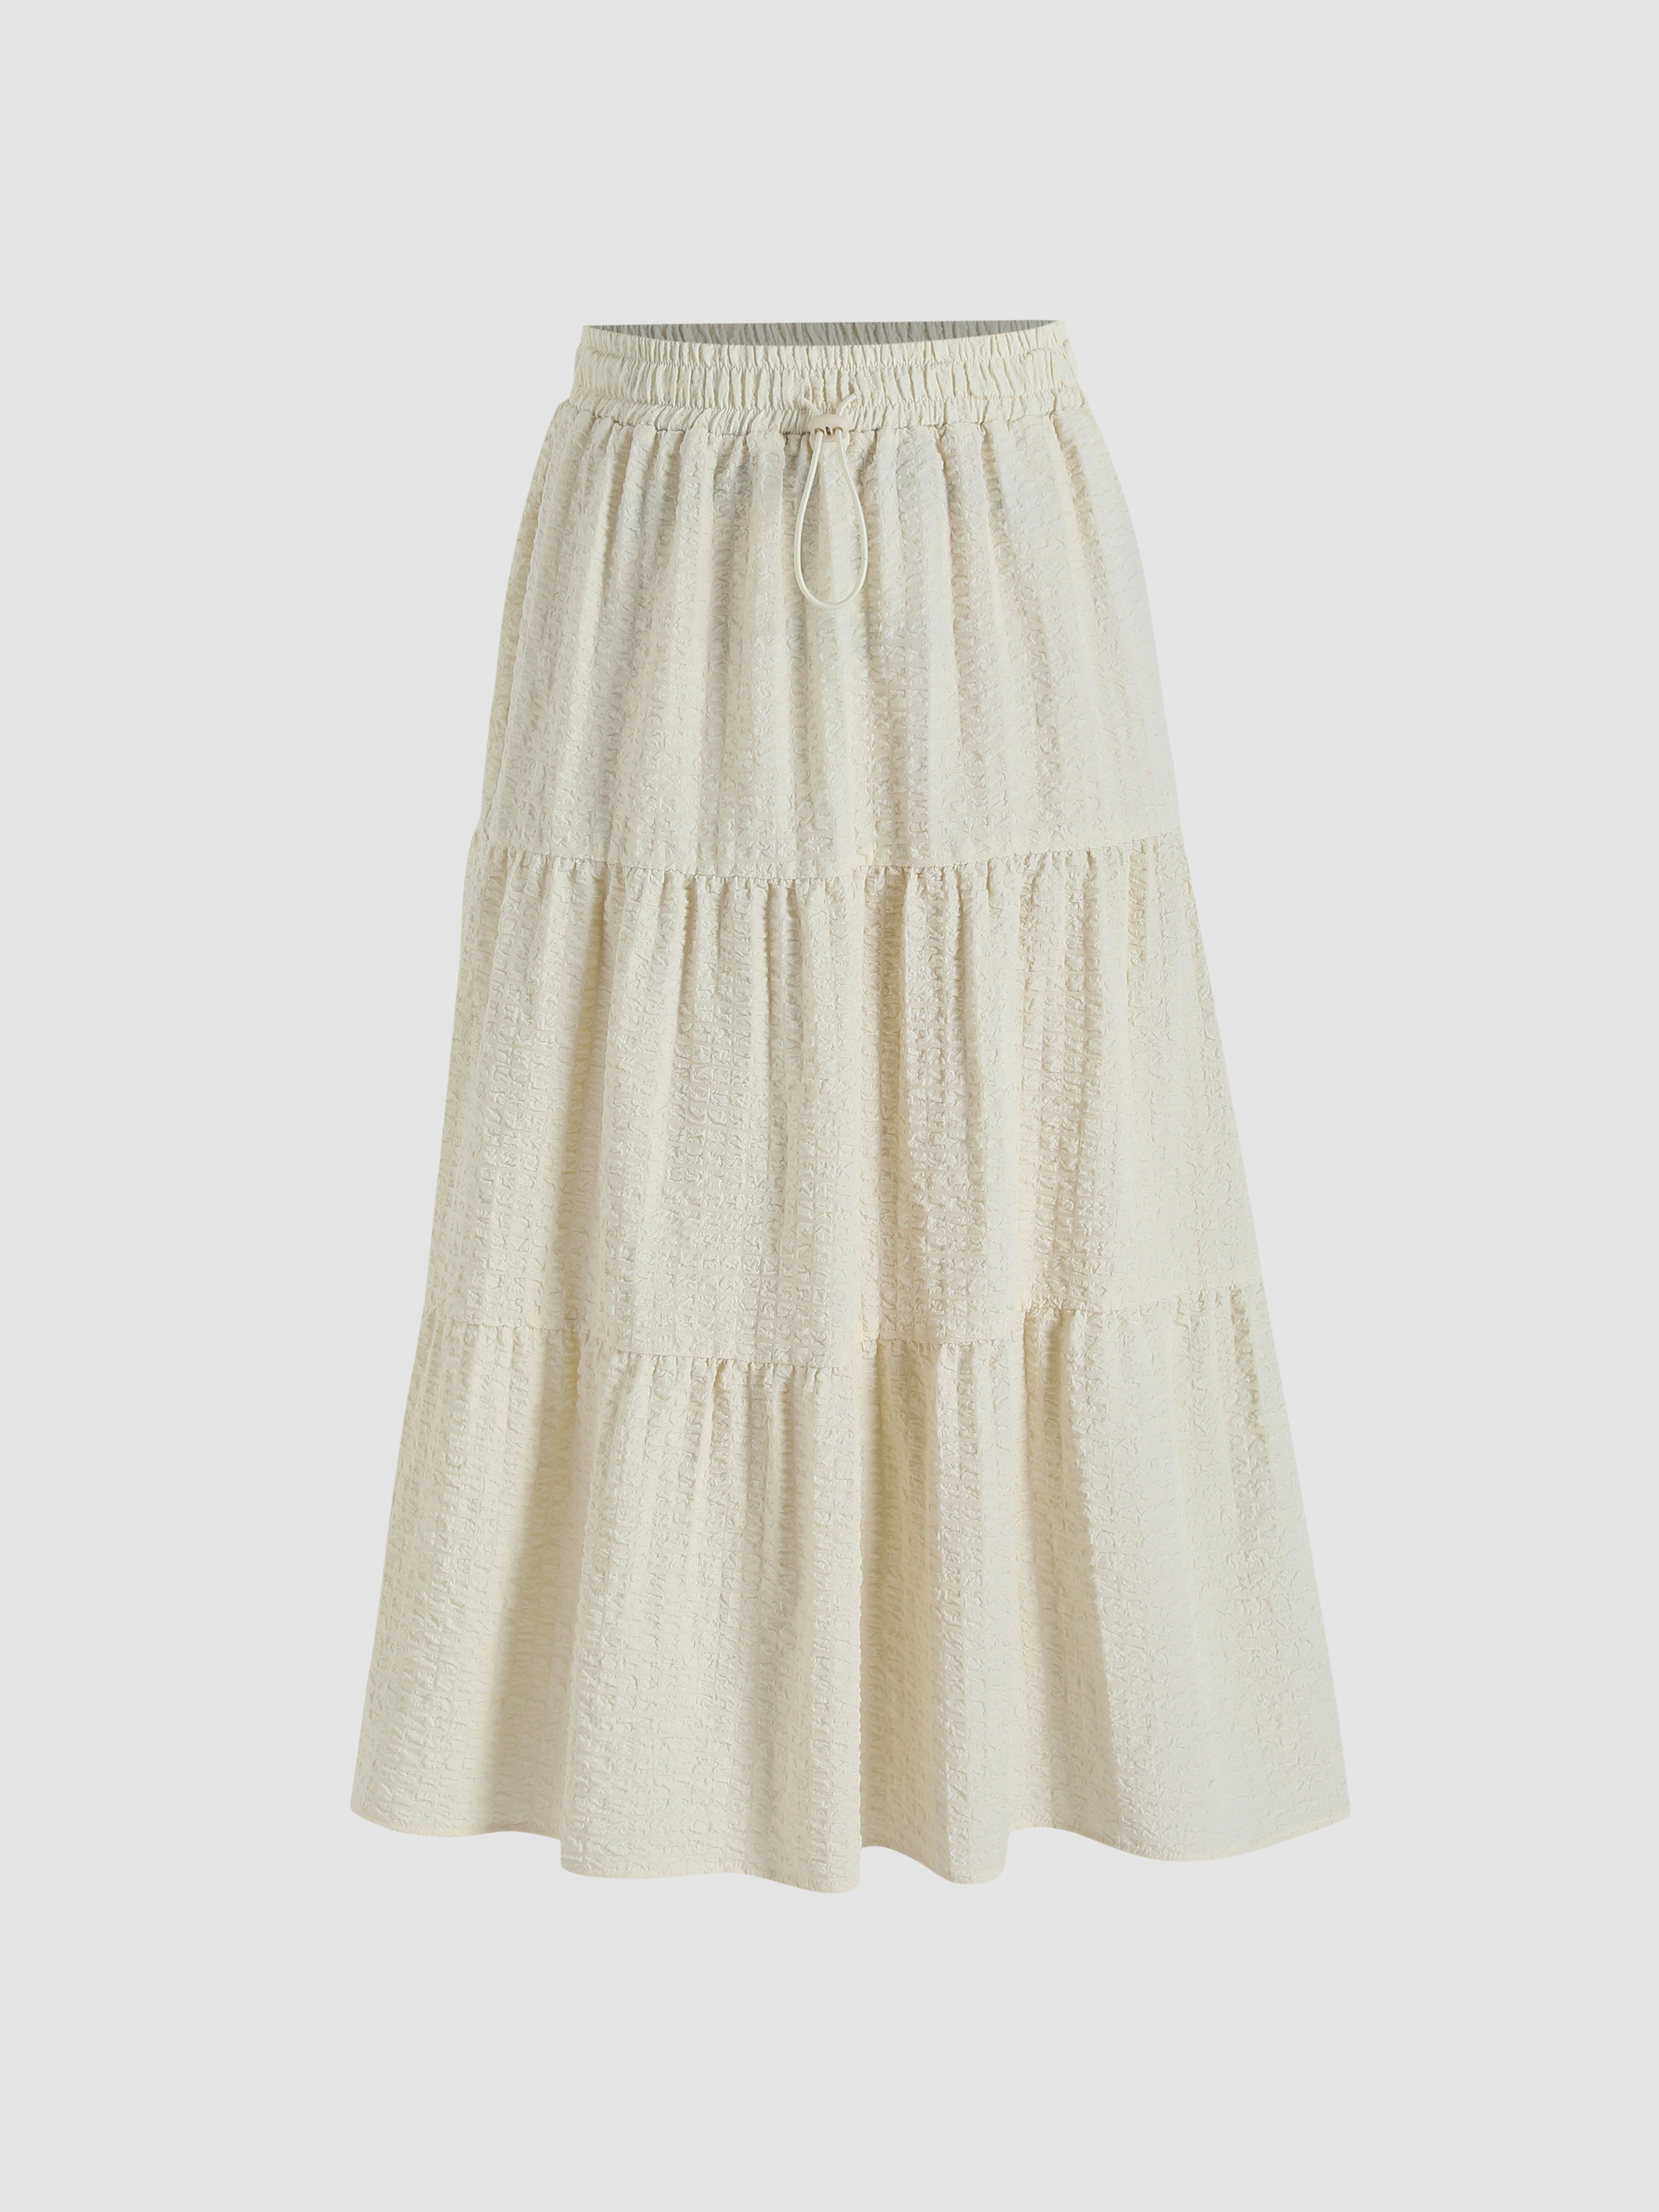 Solid Texture Elastic Waist Midi Skirt For Daily Casual